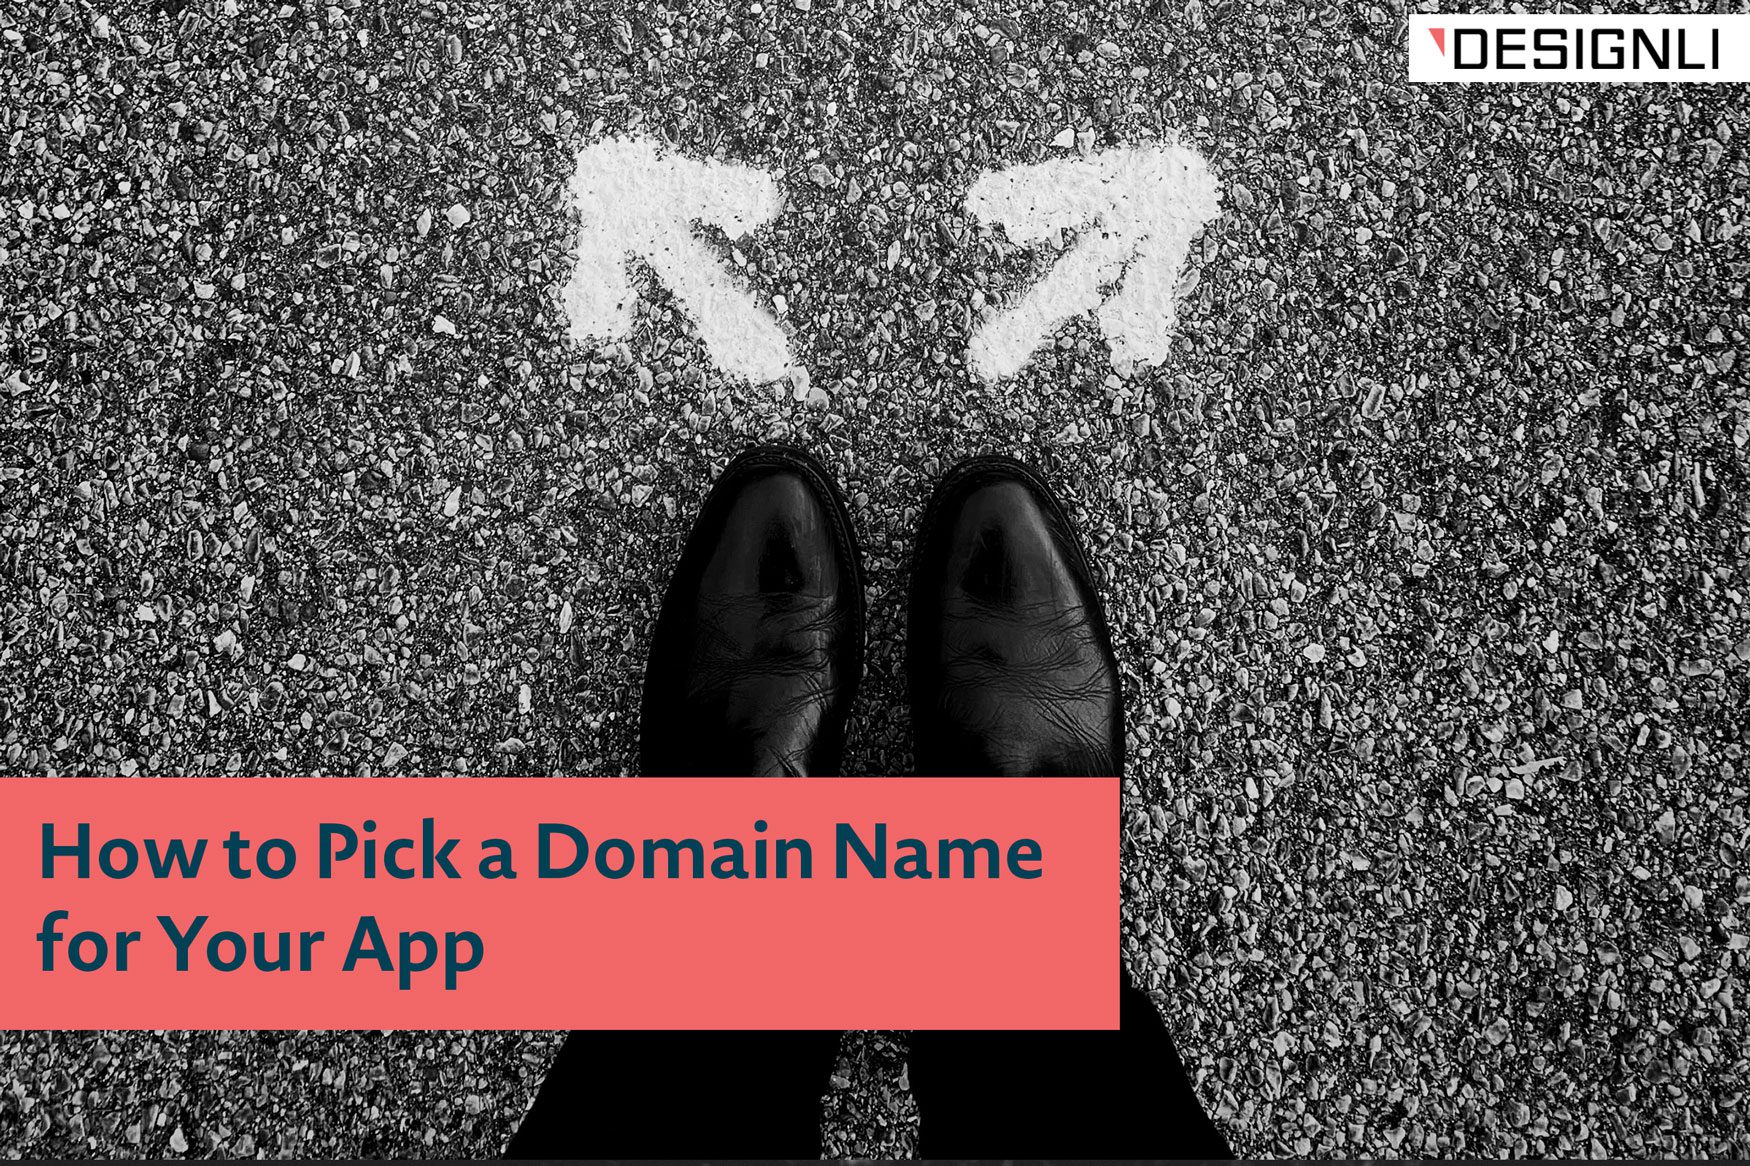 How to Pick a Domain Name for Your App